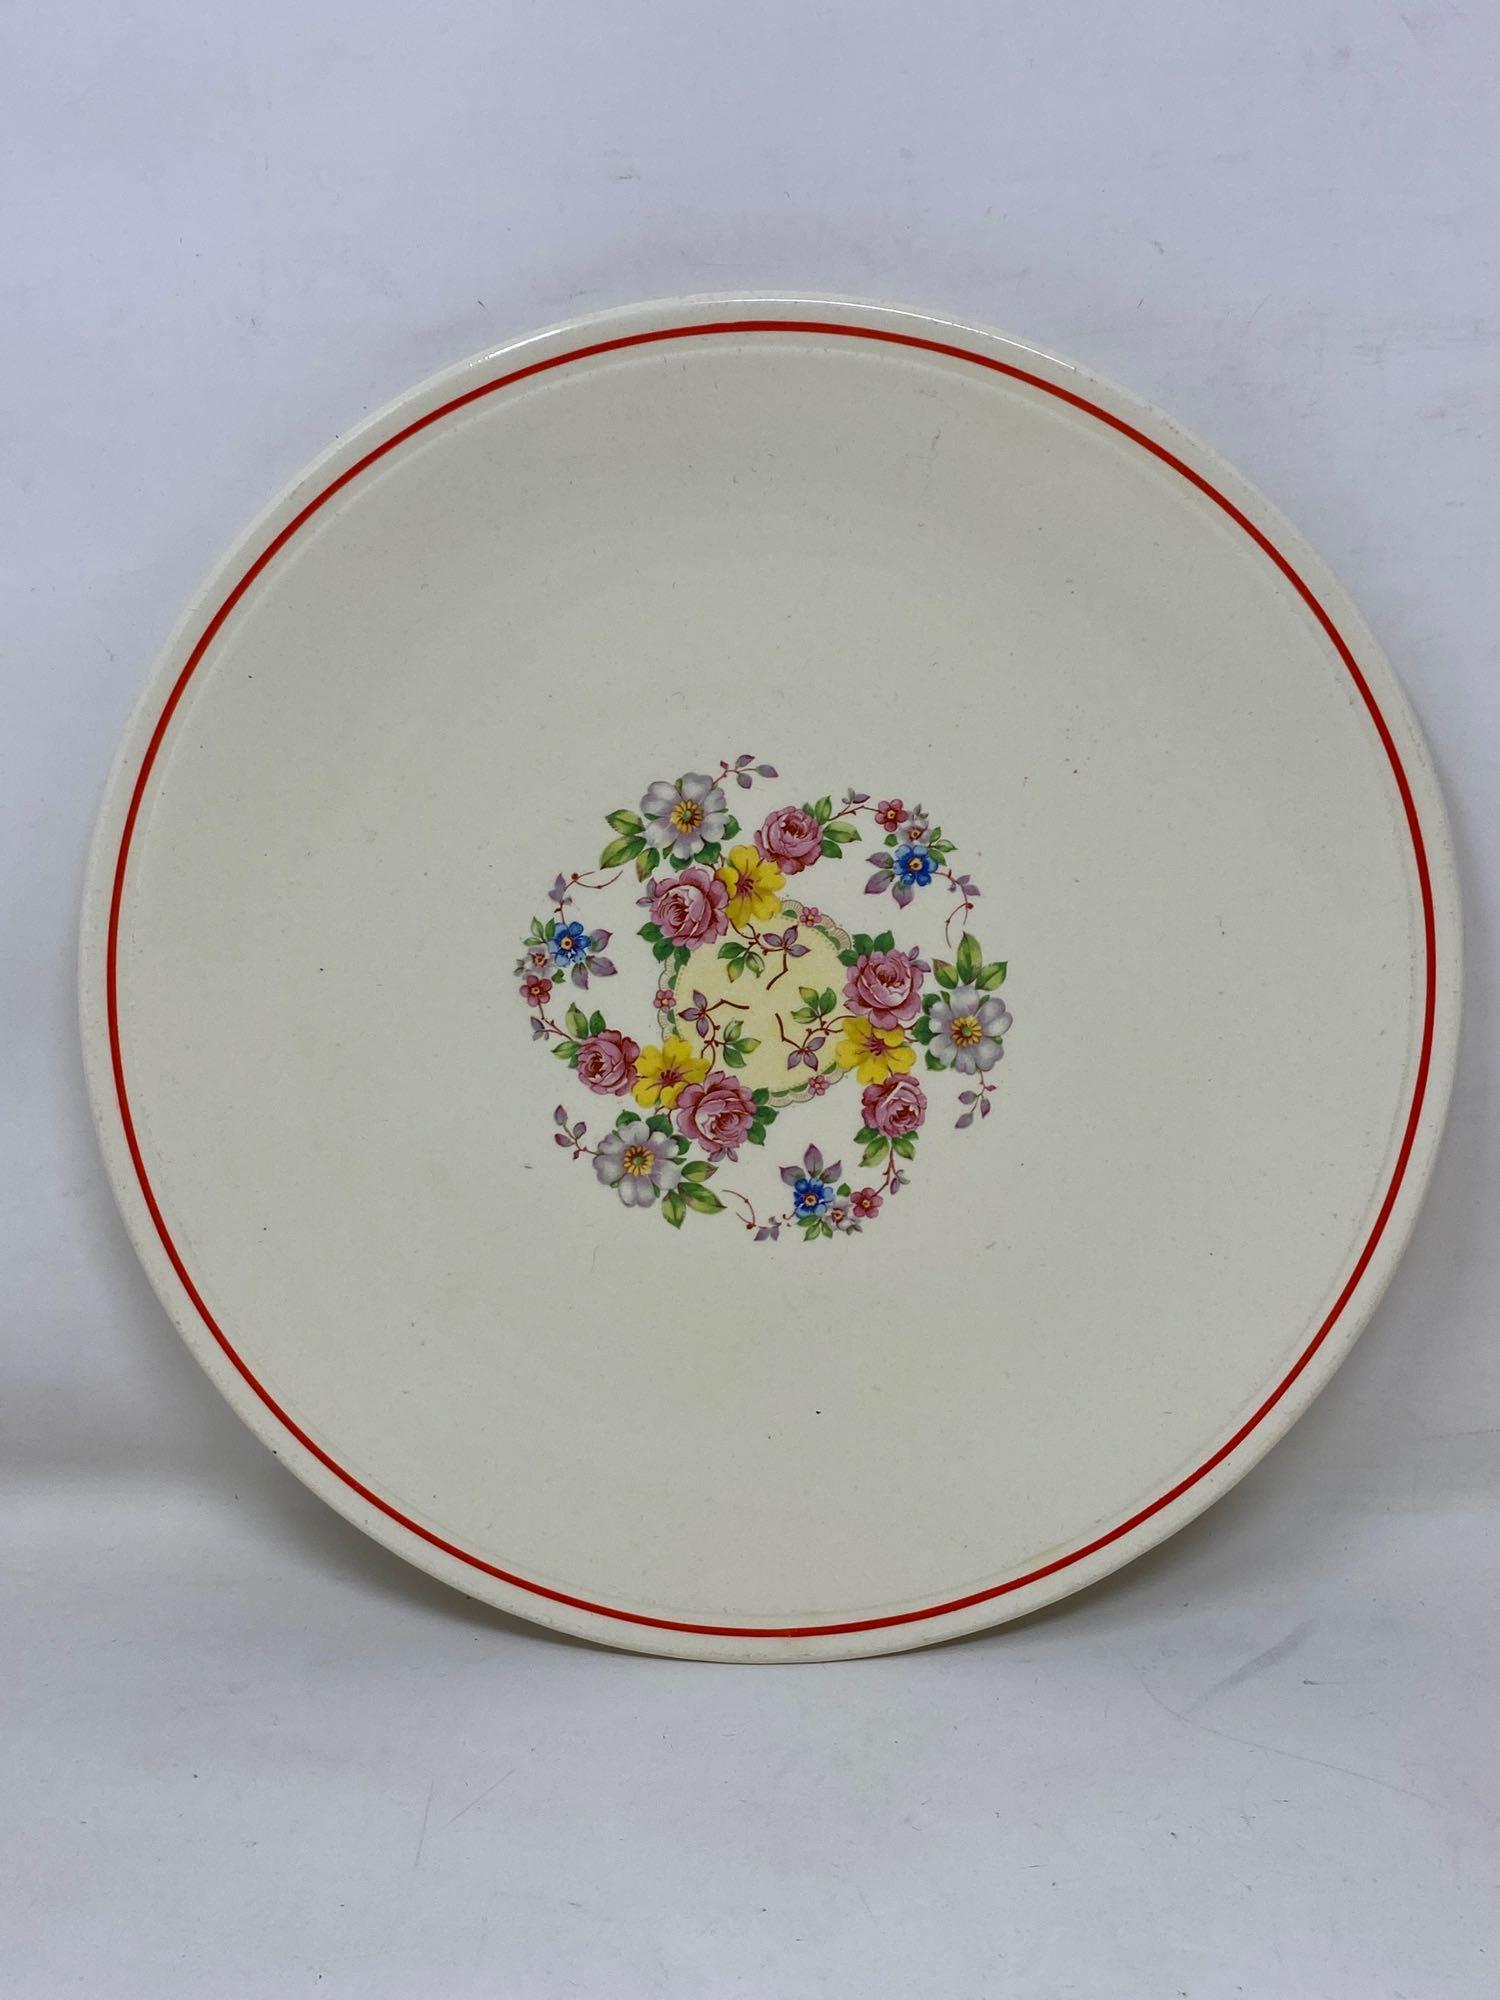 Floral Design Bowl, Plate and Pie Server